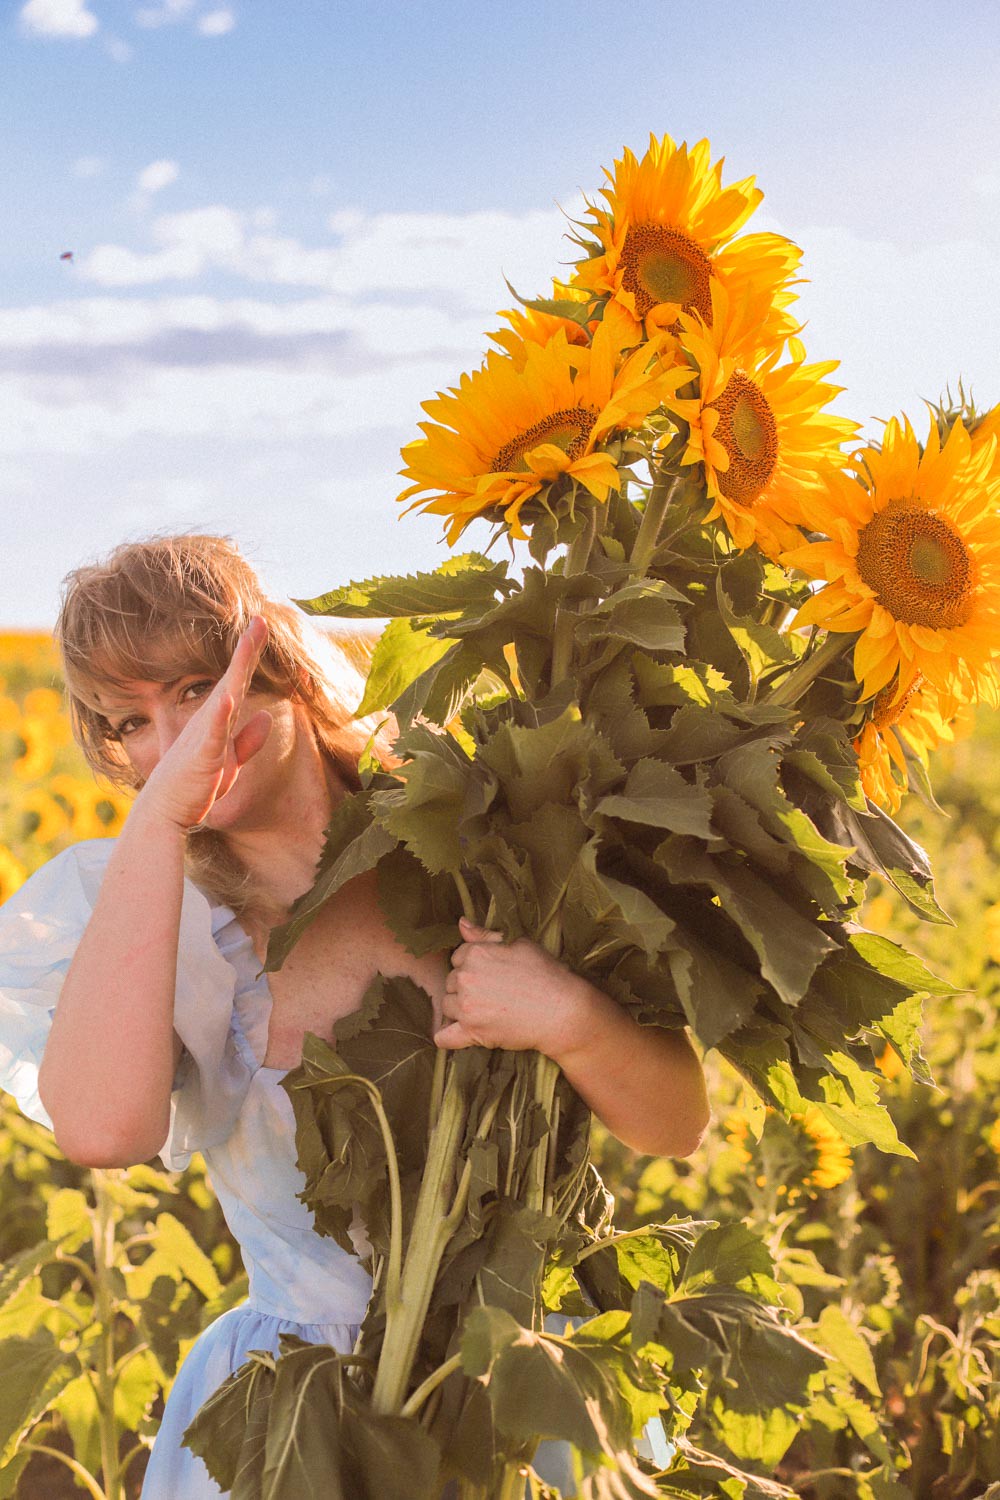 A woman in a blue dress peeks out from behind a bunch of sunflowers